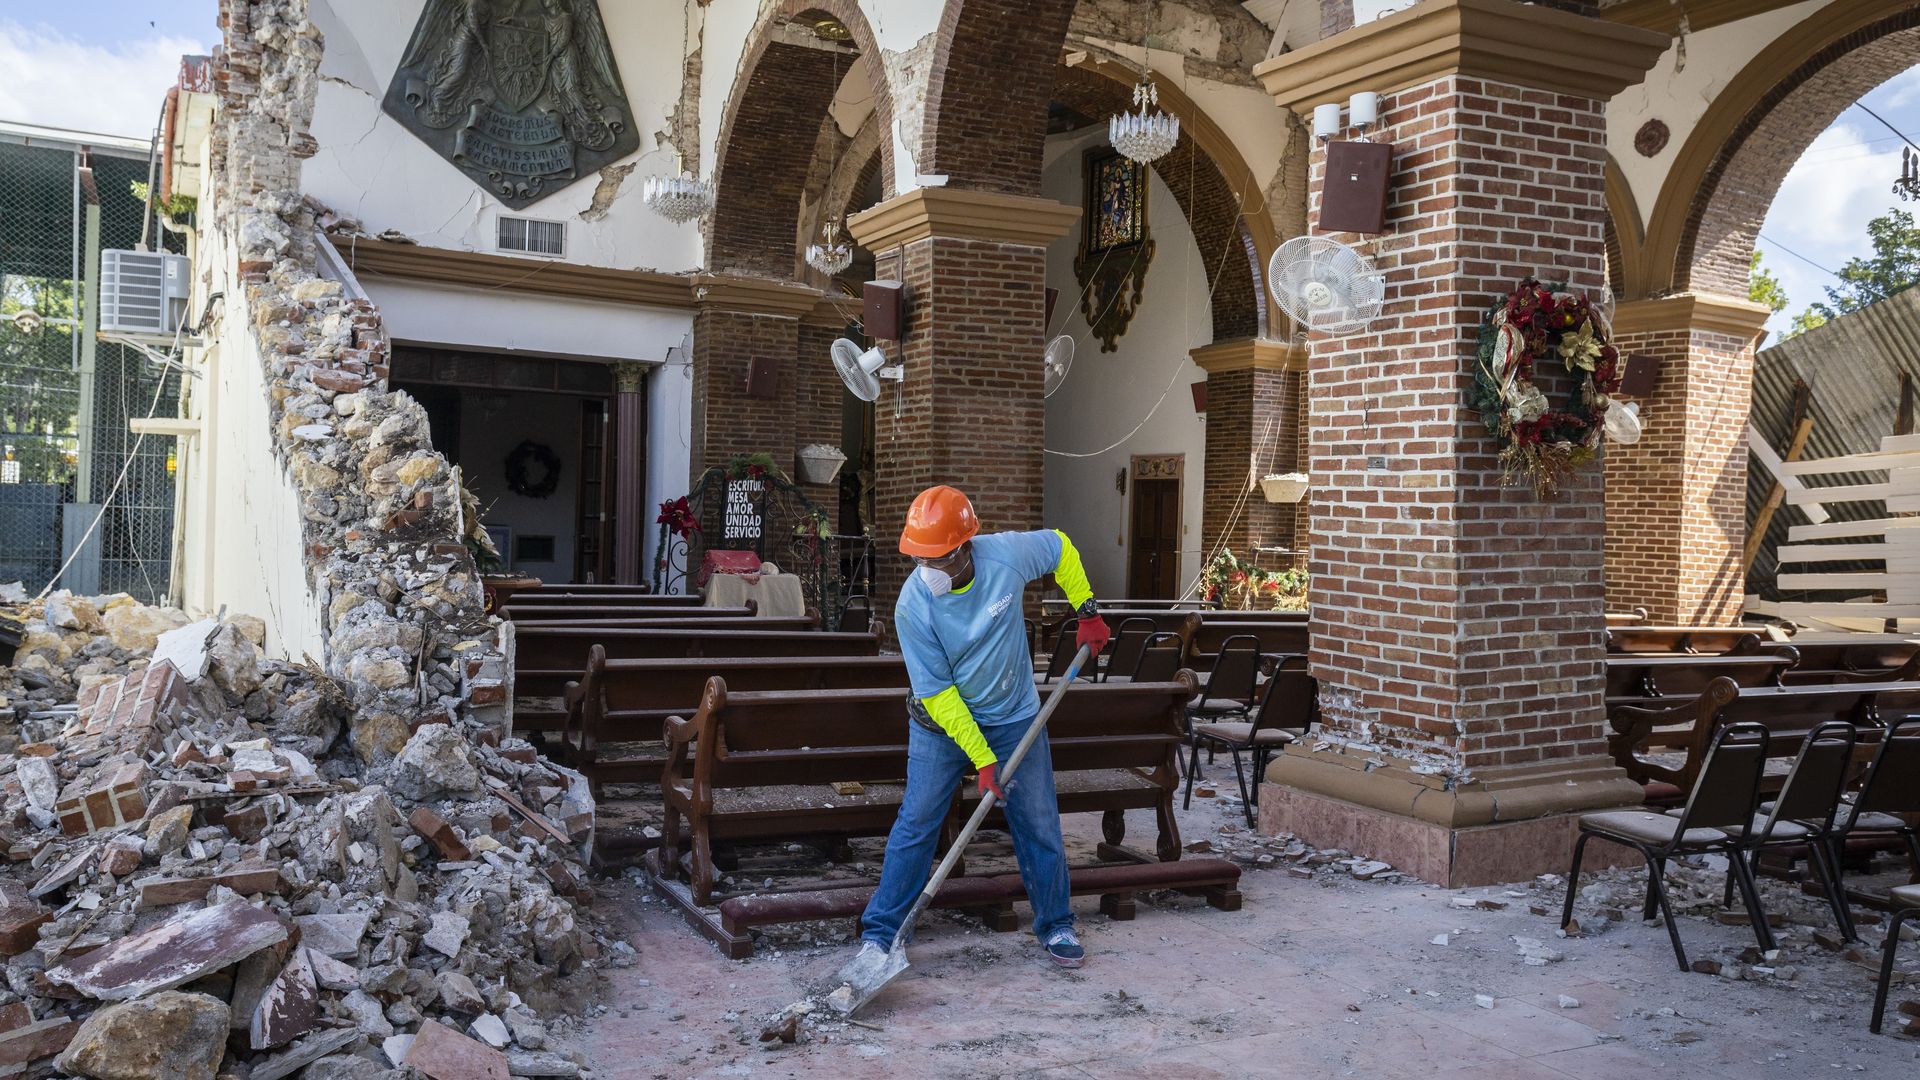 Workers clean the debris from the Immaculate Conception Church after 6.4-magnitude earthquake hit Guayanilla, Puerto Rico on January 11